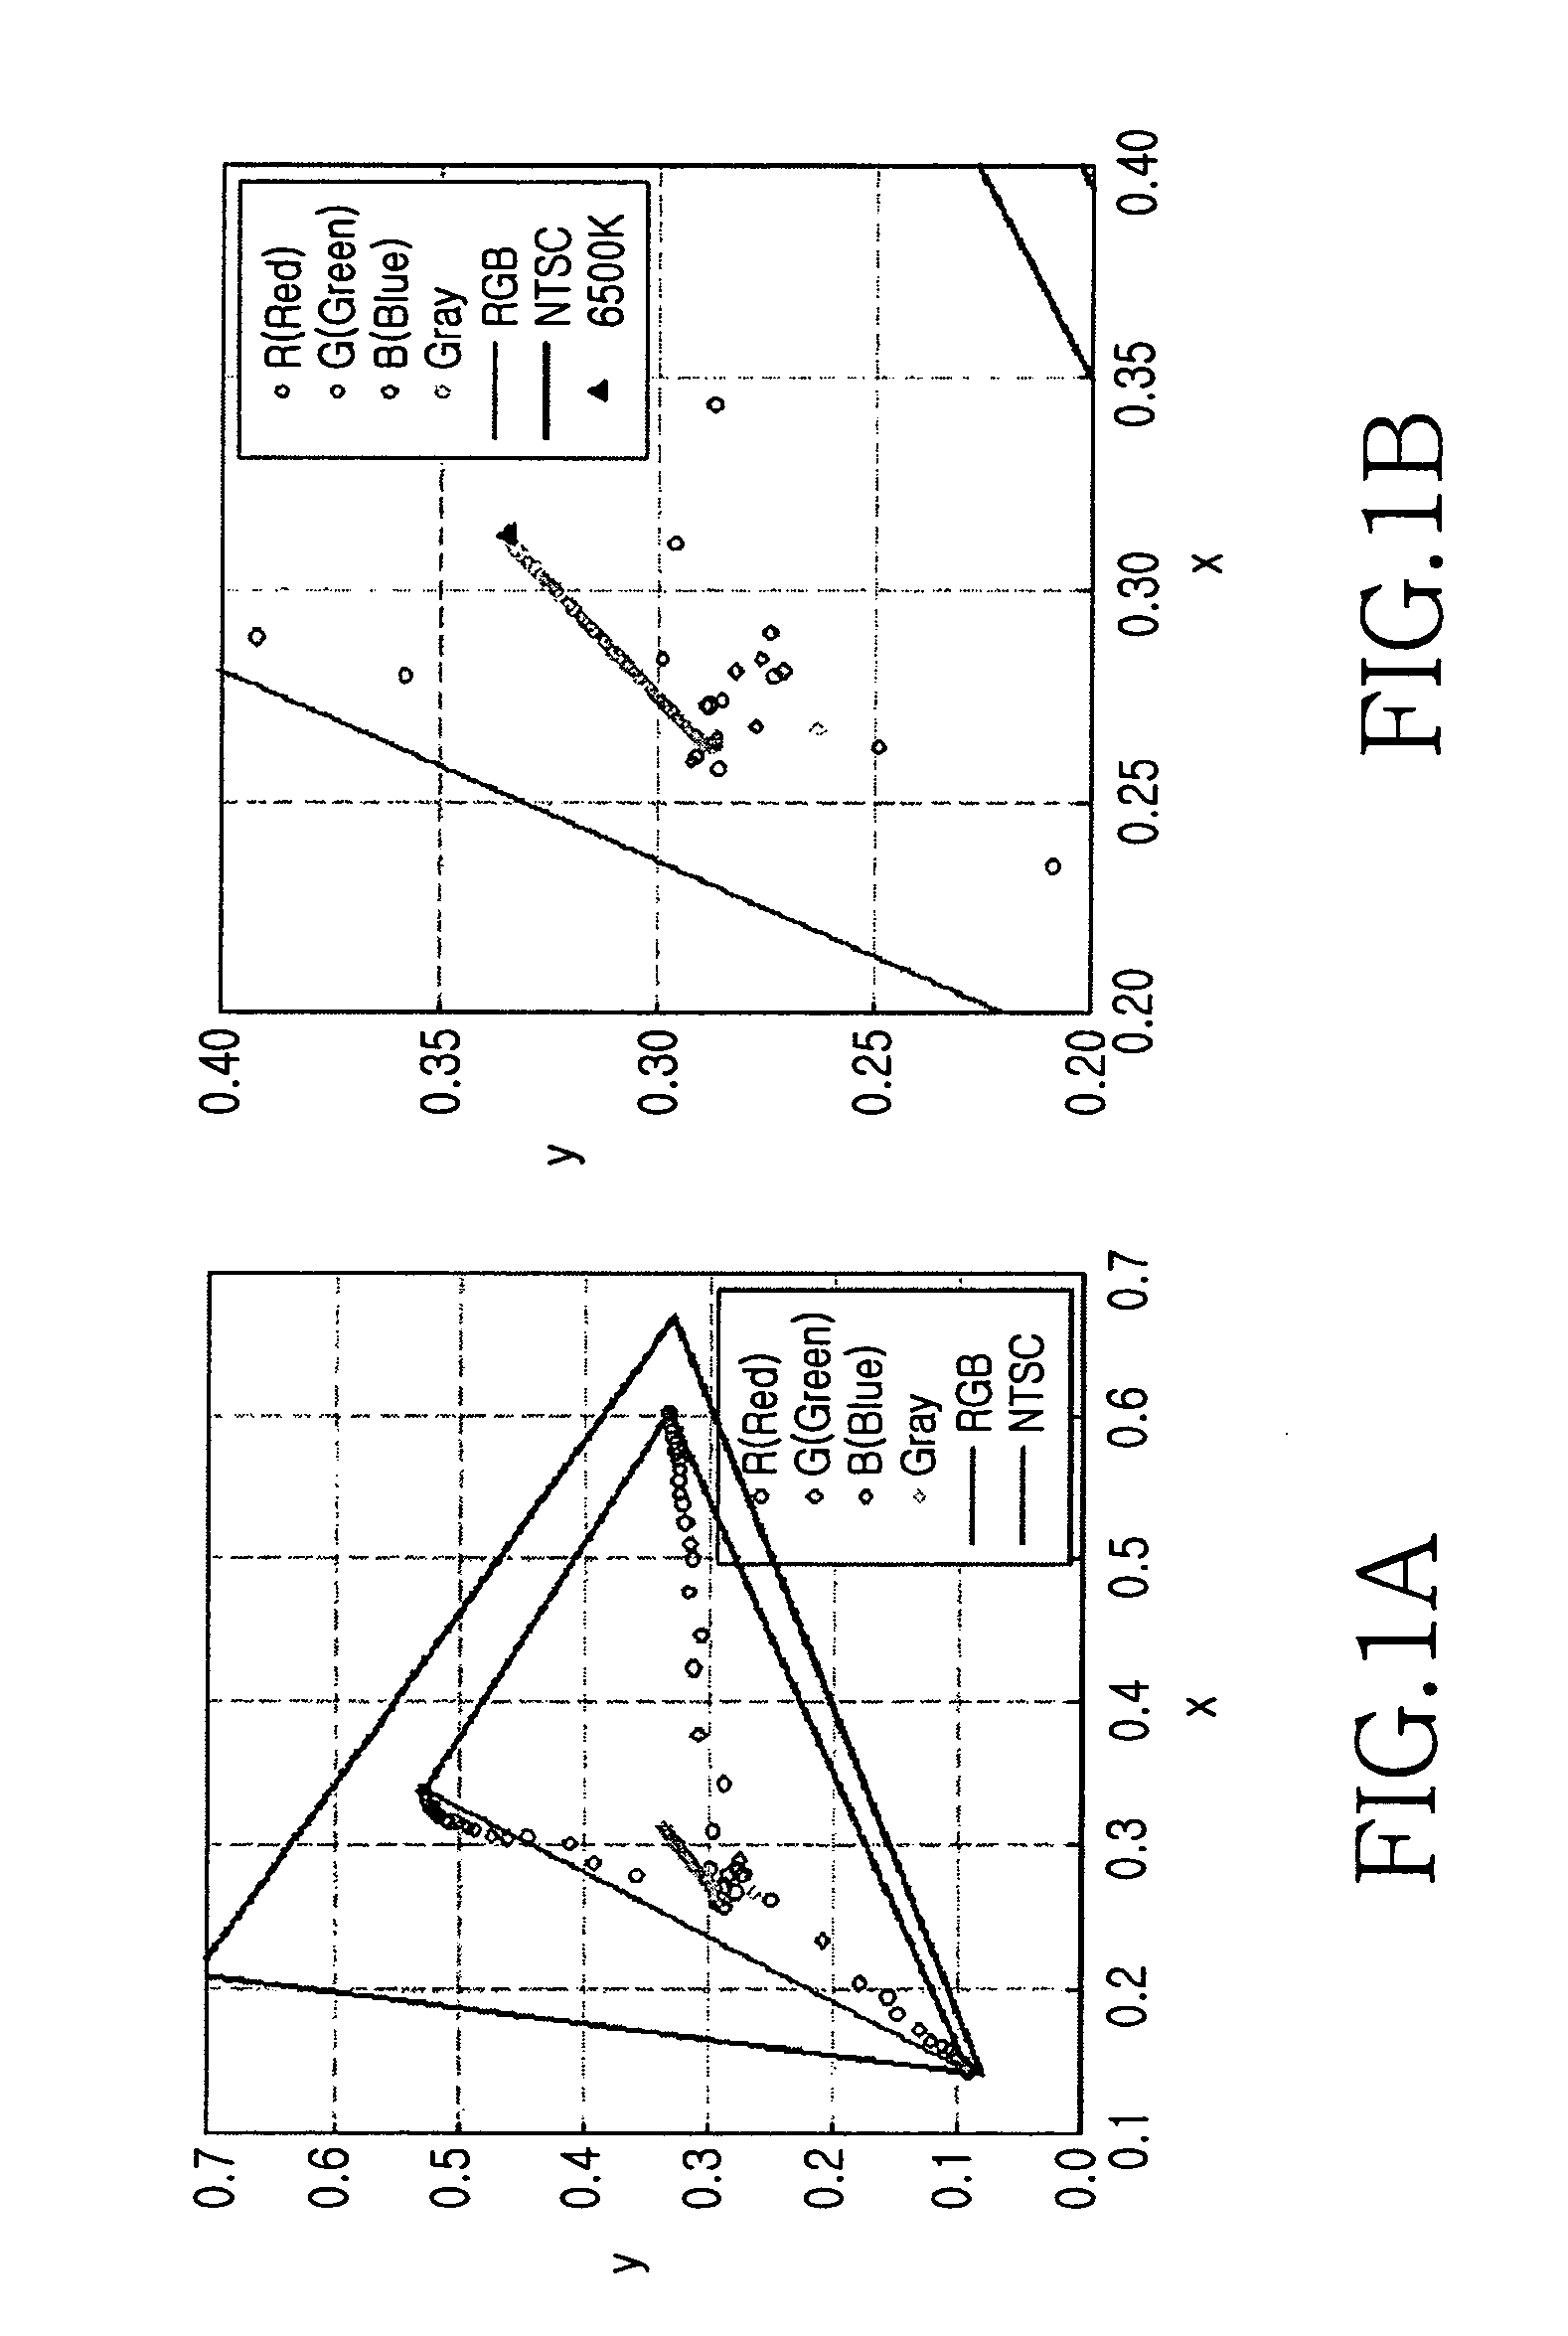 Head drum assembly for magnetic recording and reproducing apparatus